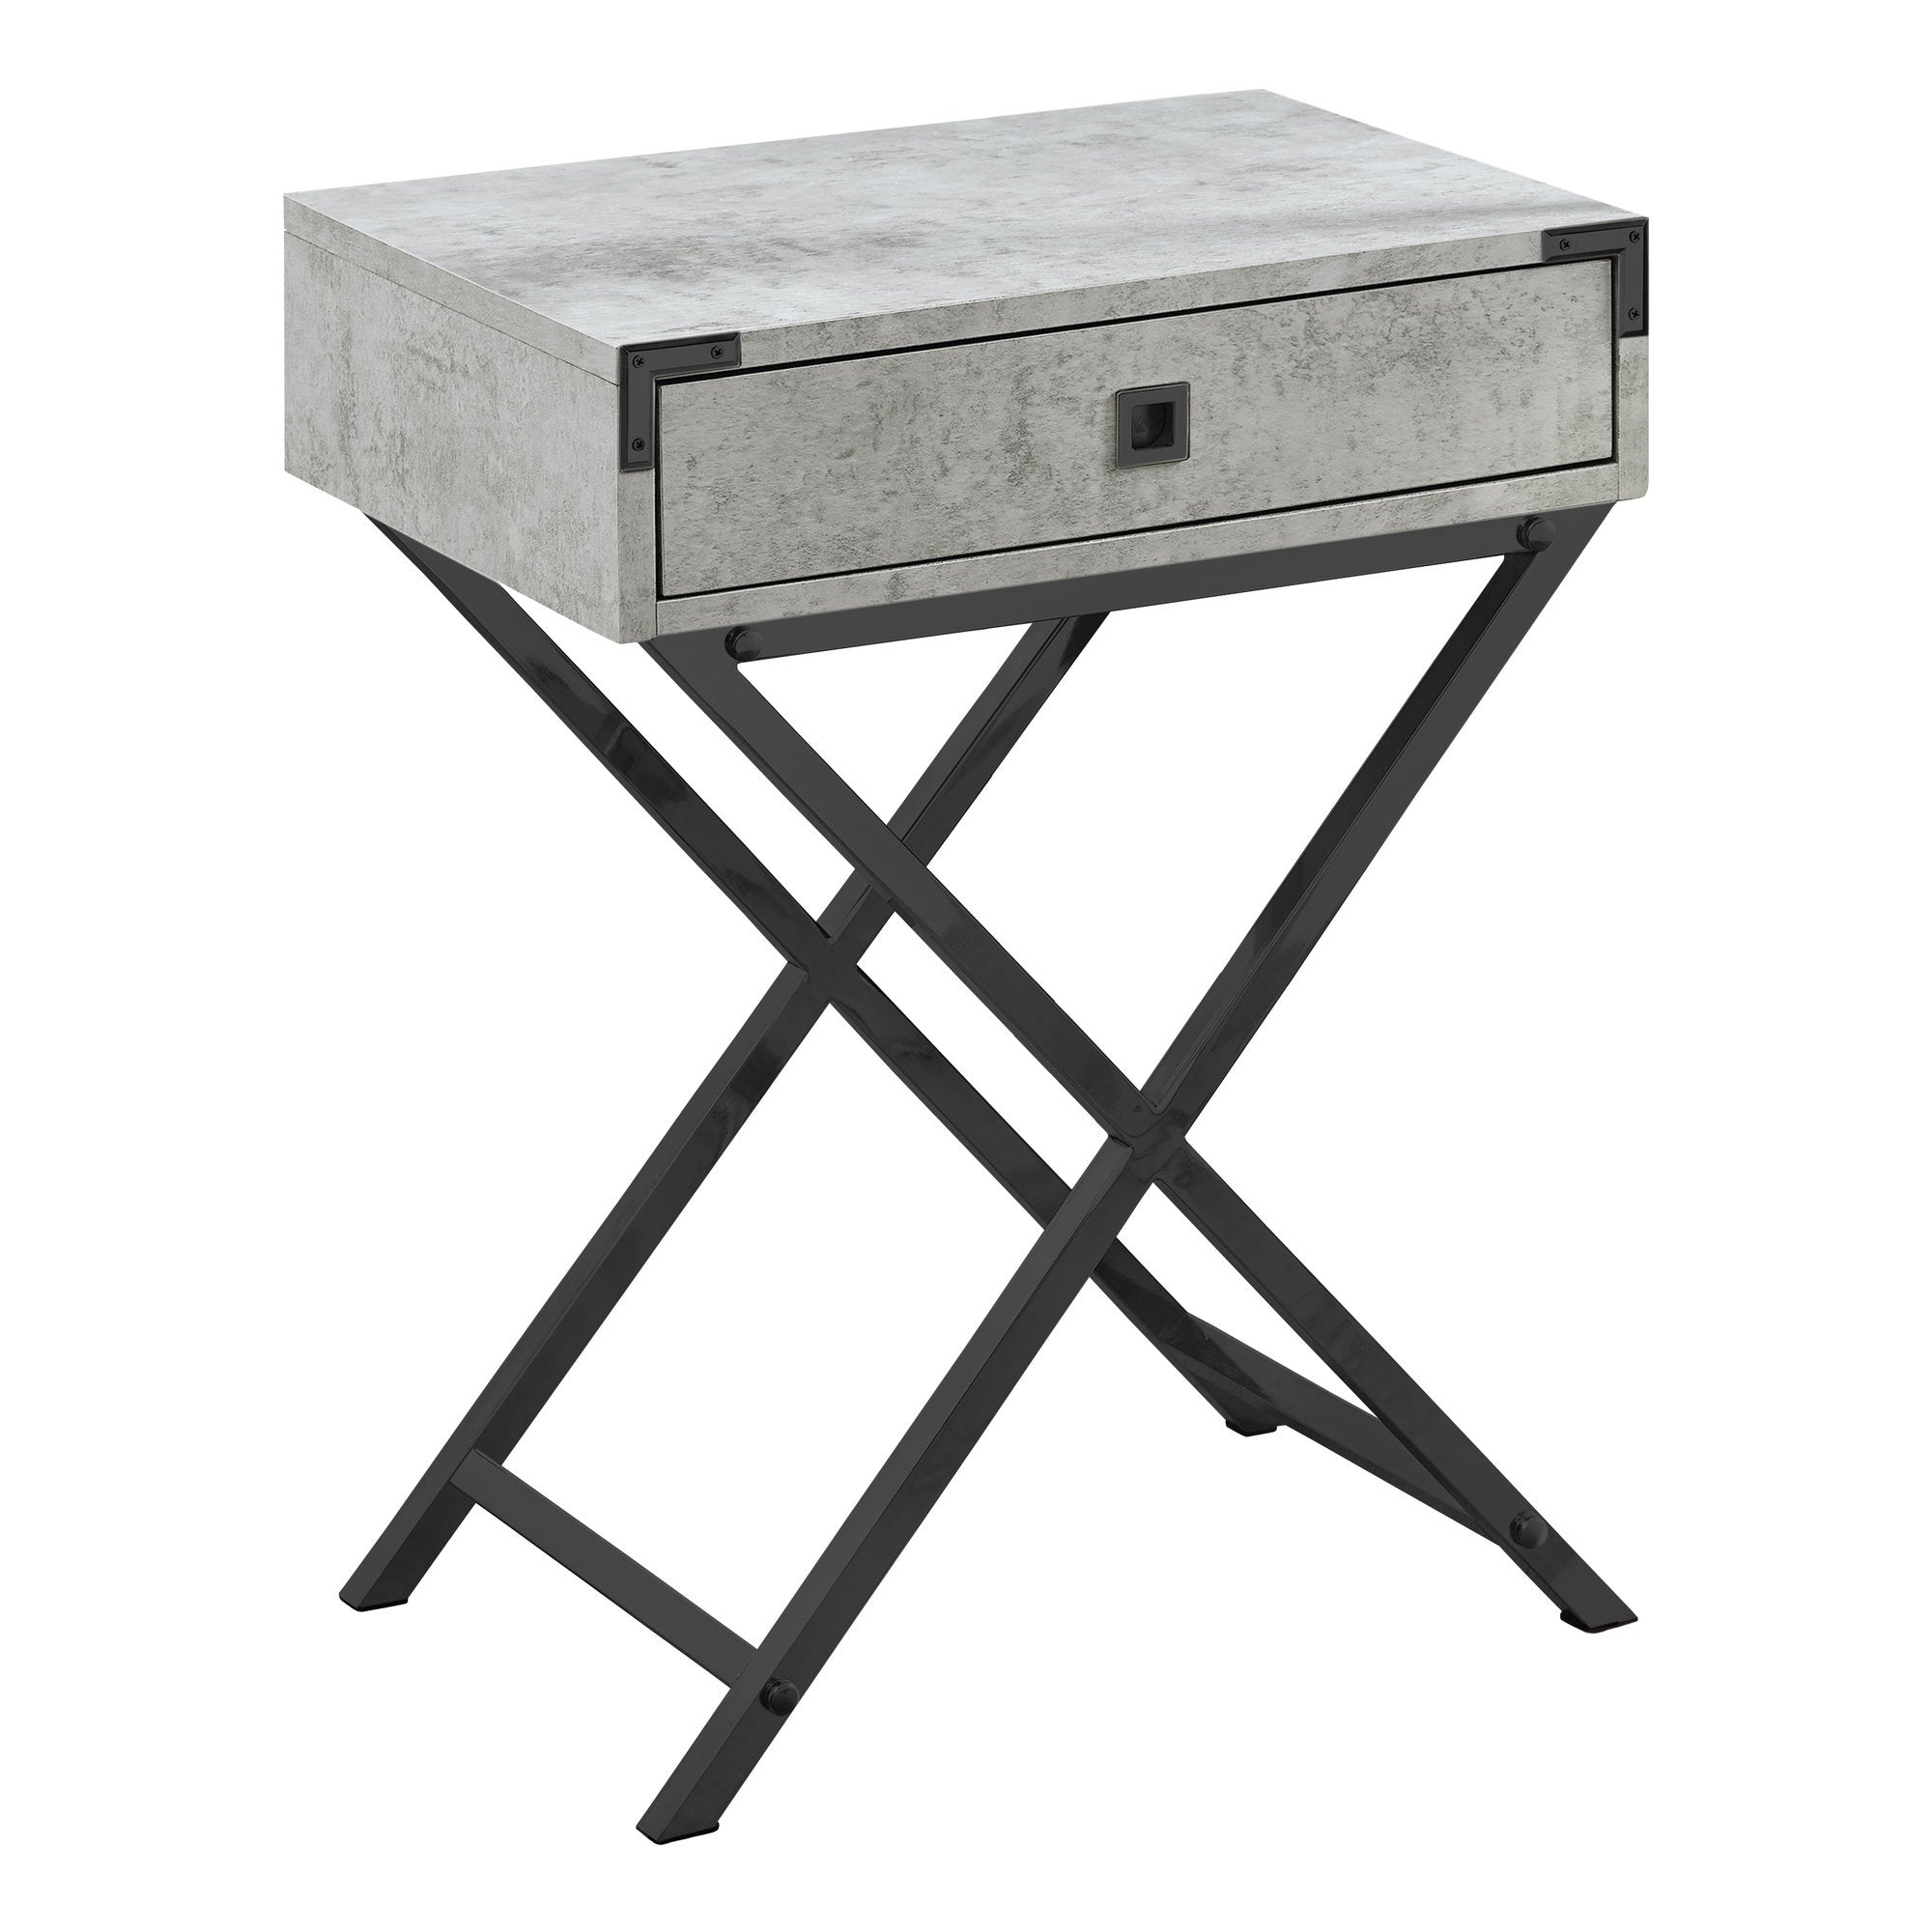 MN-303552    Accent Table, Side, End, Nightstand, Lamp, Living Room, Bedroom, Metal Legs, Laminate, Grey Cement Look, Black, Contemporary, Modern